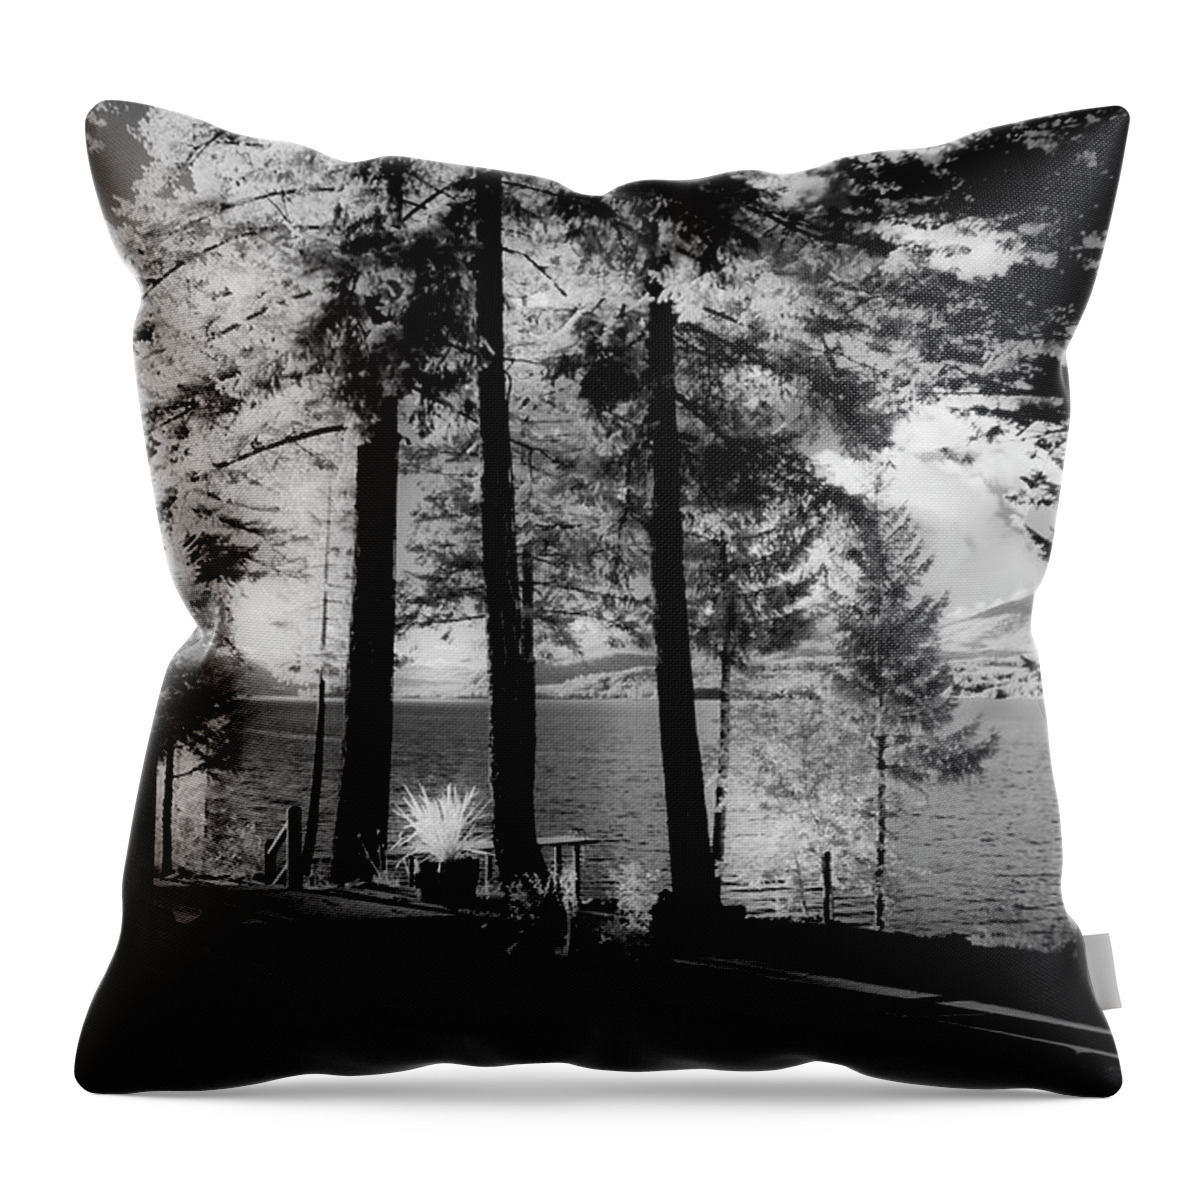 Scenic Throw Pillow featuring the photograph Glow 2 by Lee Santa